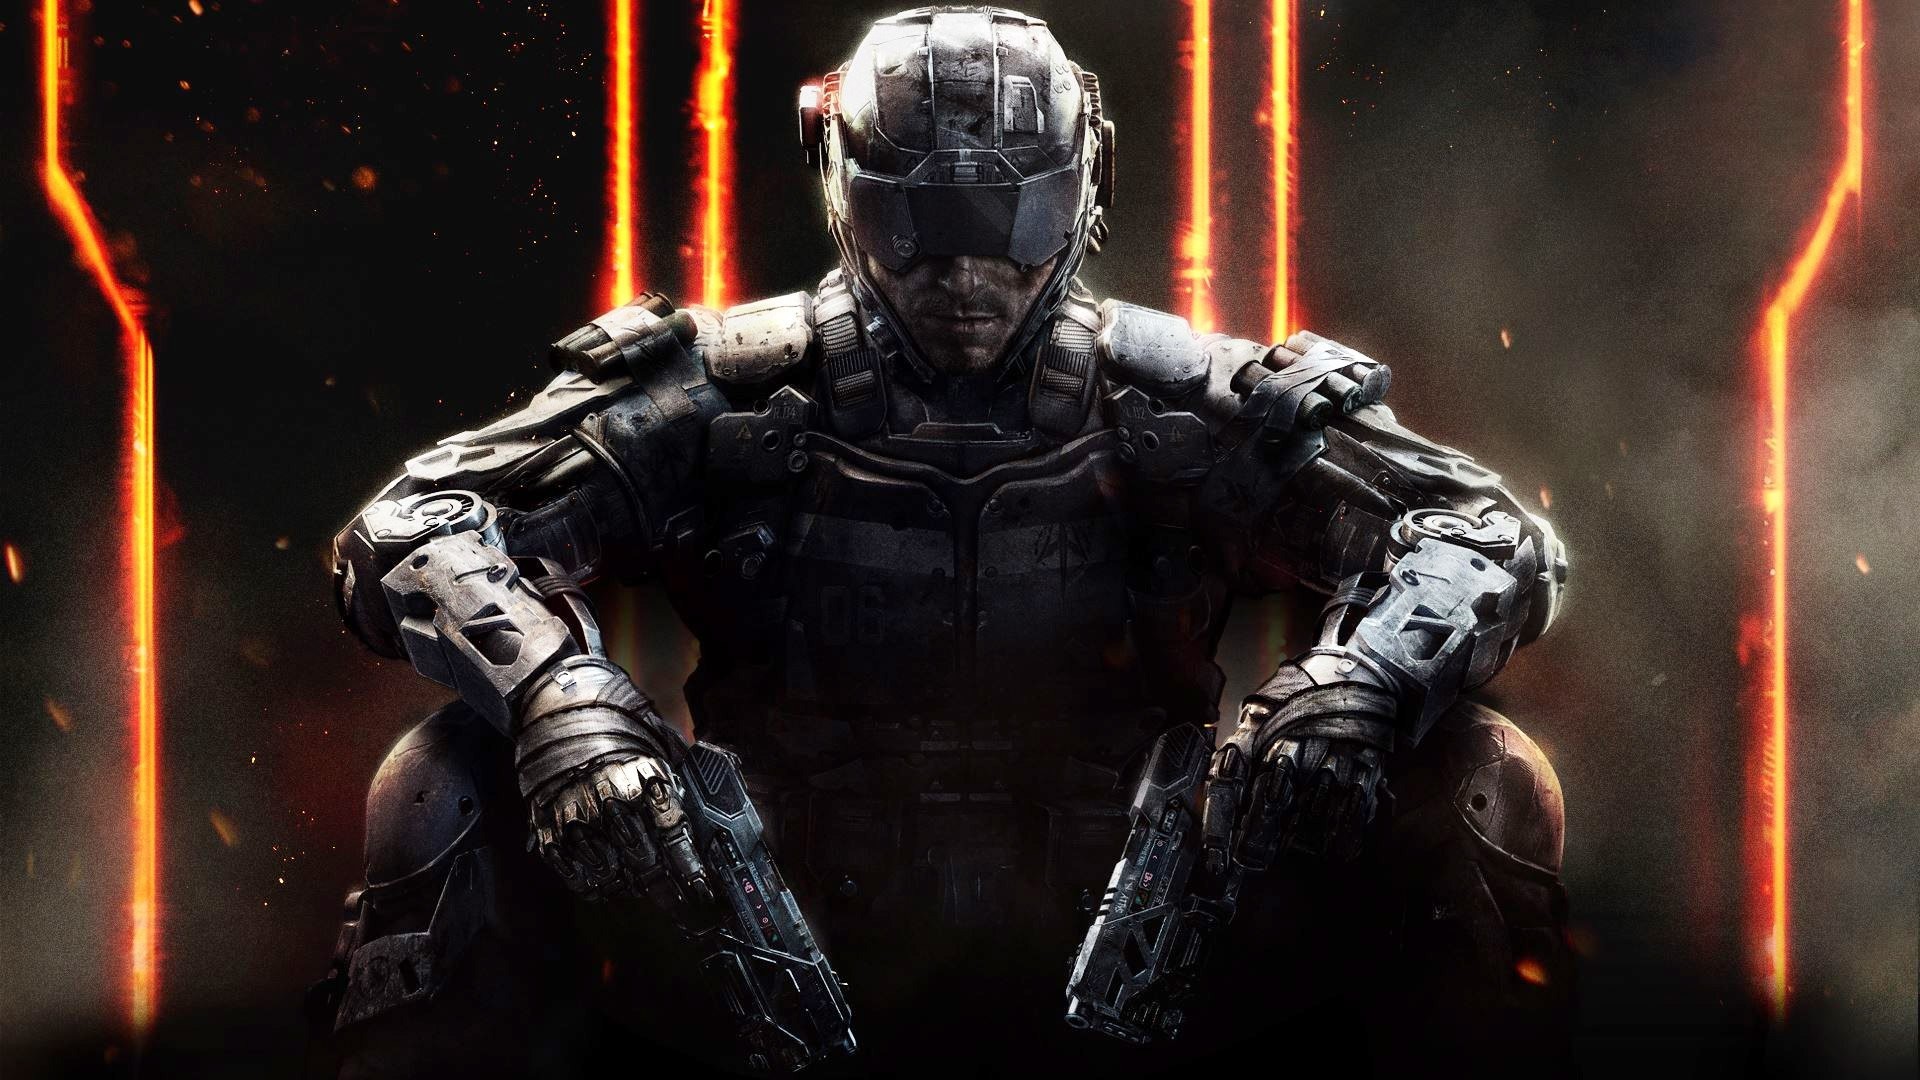 1920x1080 Call of Duty: Black Ops 3 Wallpapers